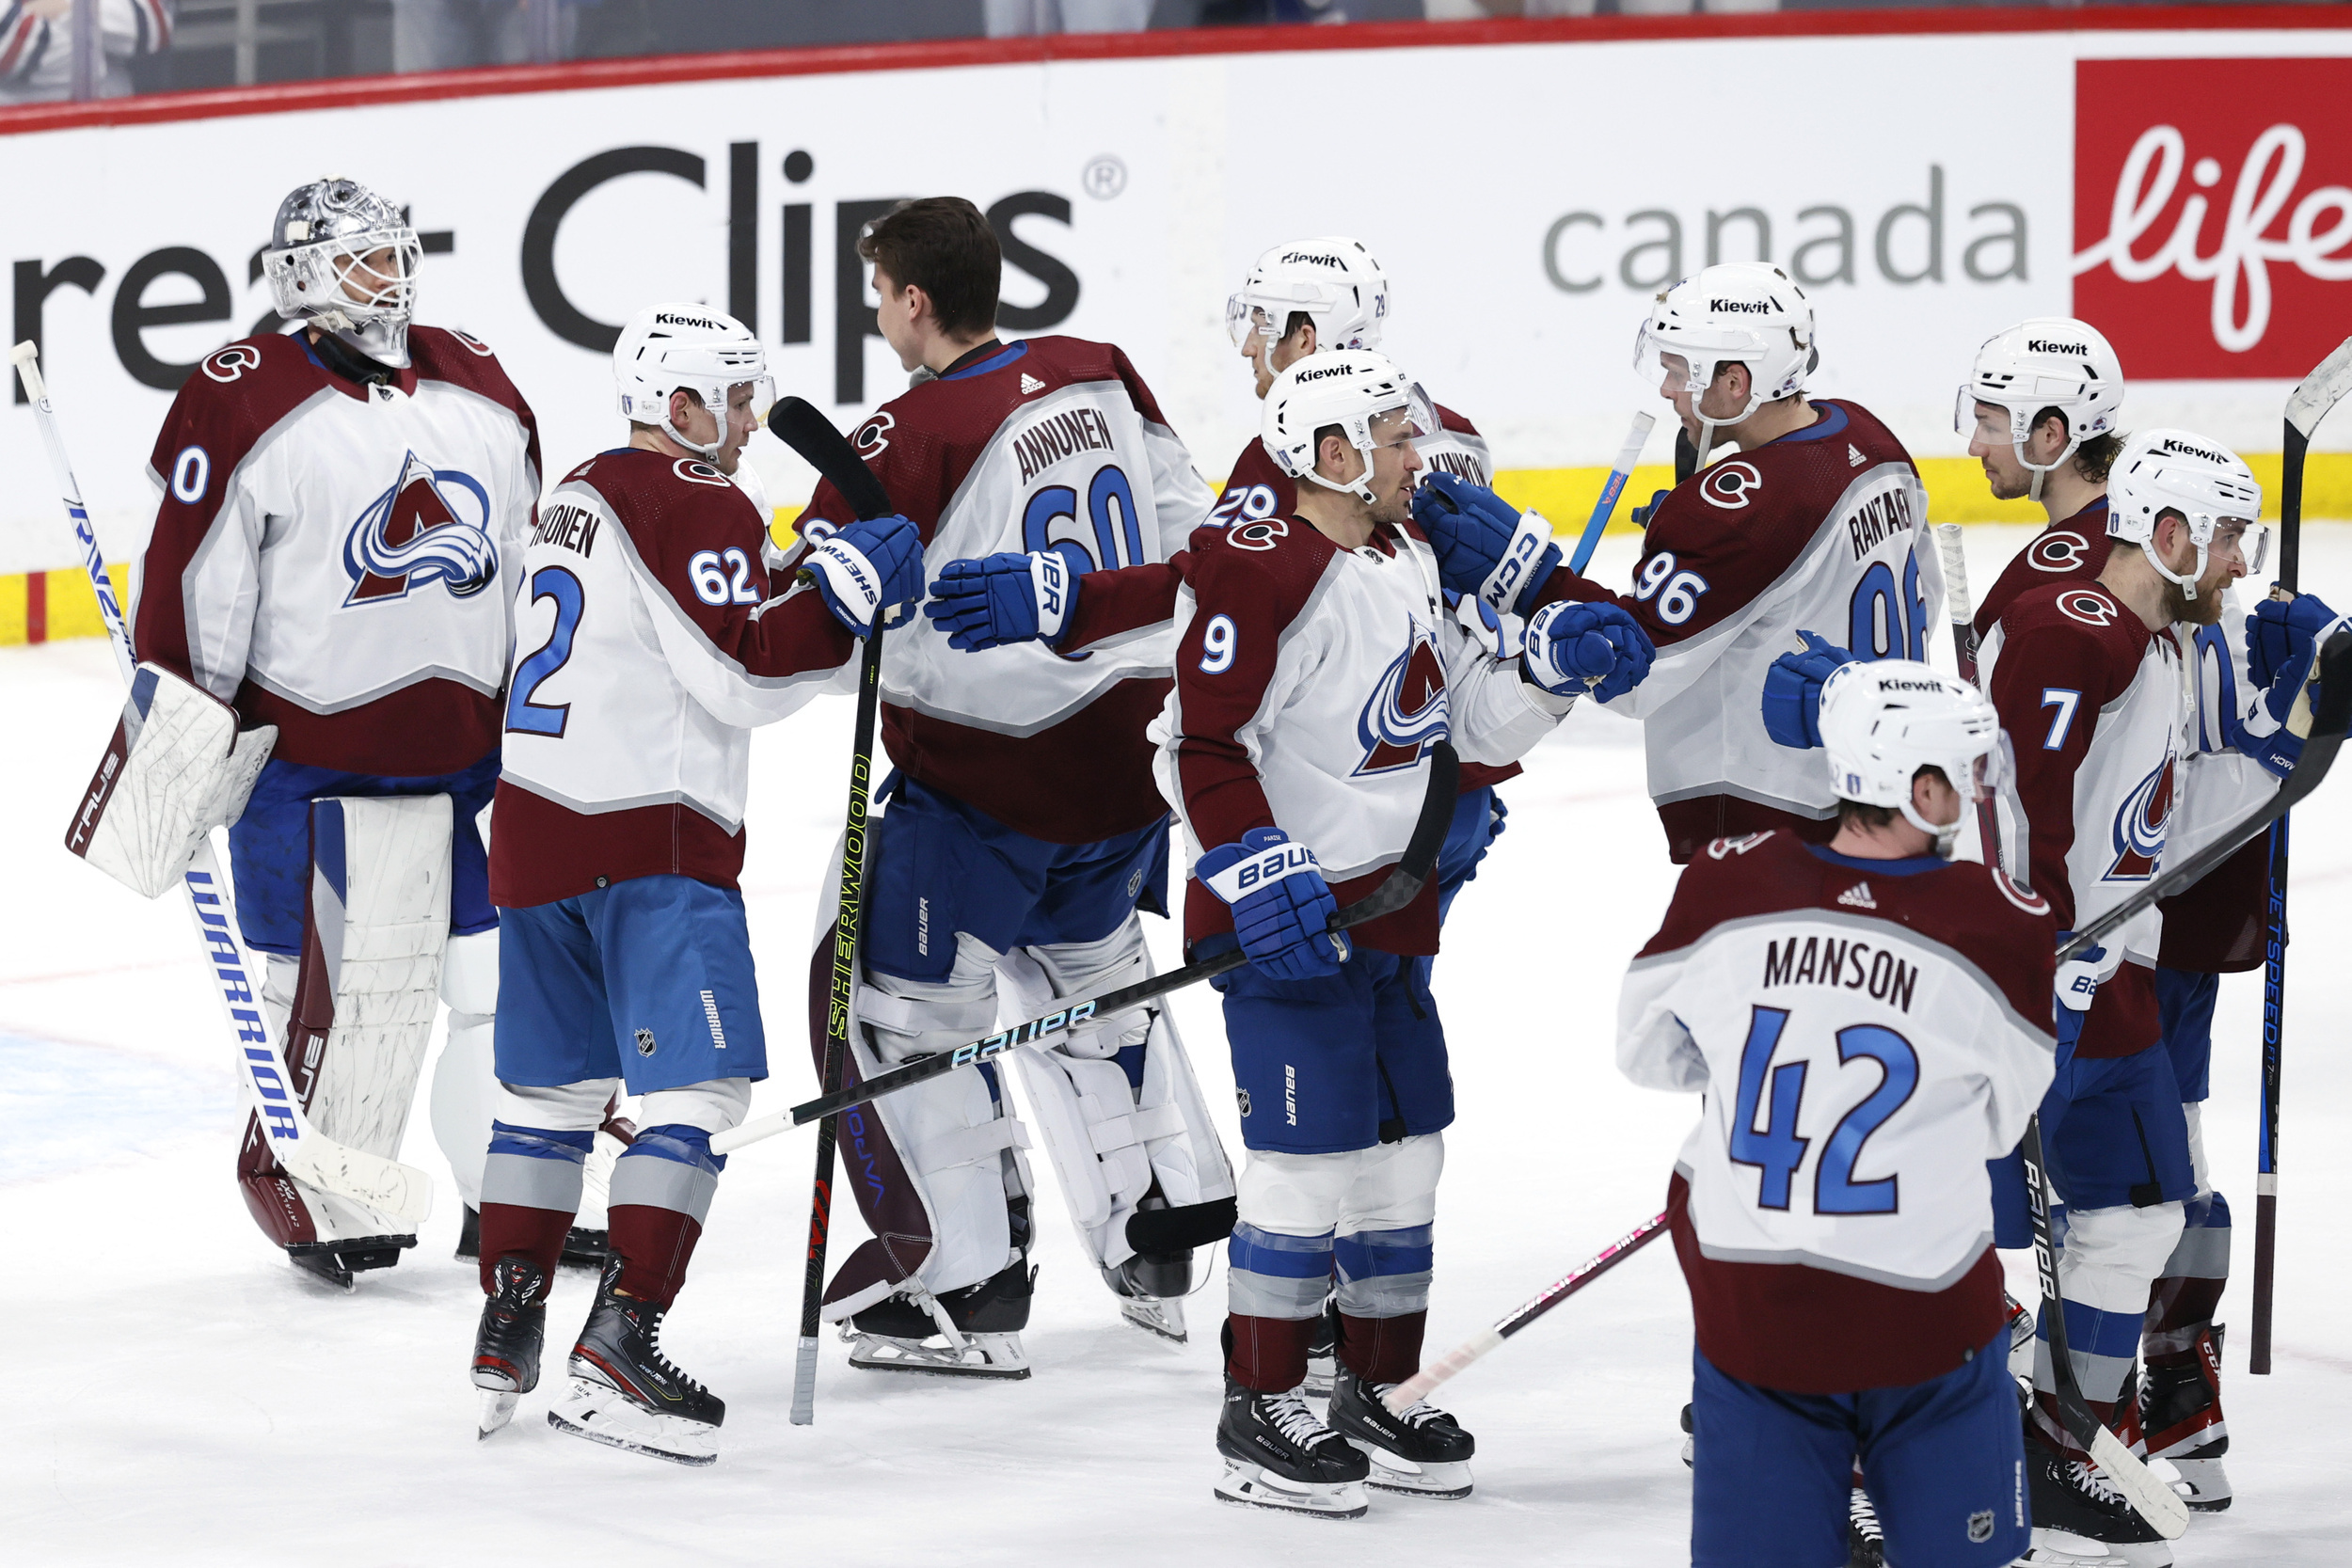 avalanche beat jets to advance to nhl playoffs second round